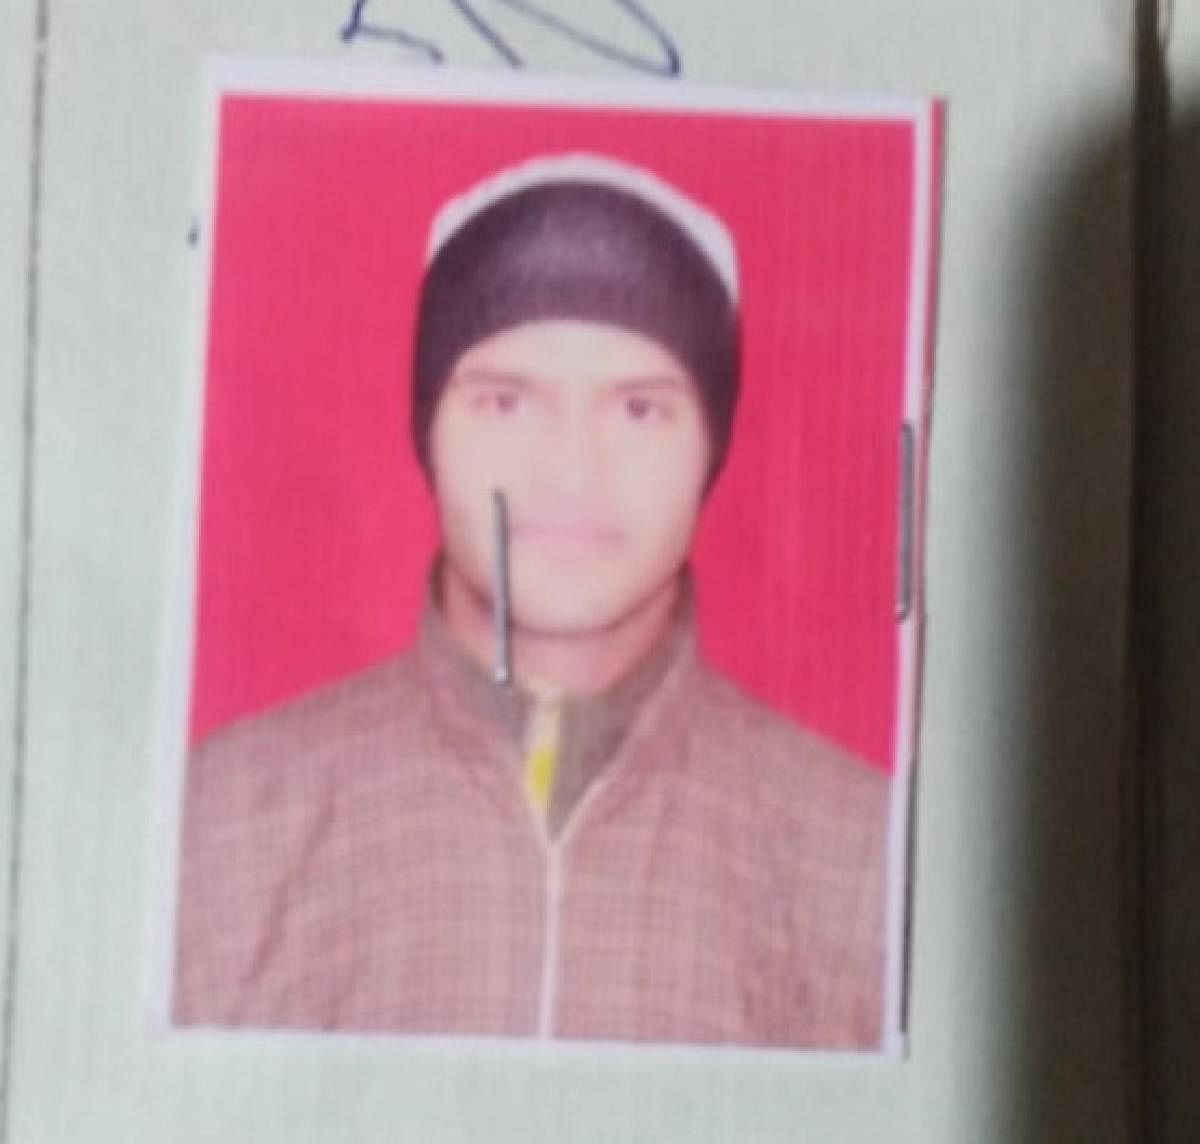 Police said 24-year-old Sheikh (Belt No. 488/SPO) hails from militancy infested Zainpora area of Shopian district. He was engaged as an SPO on March 11, 2017.